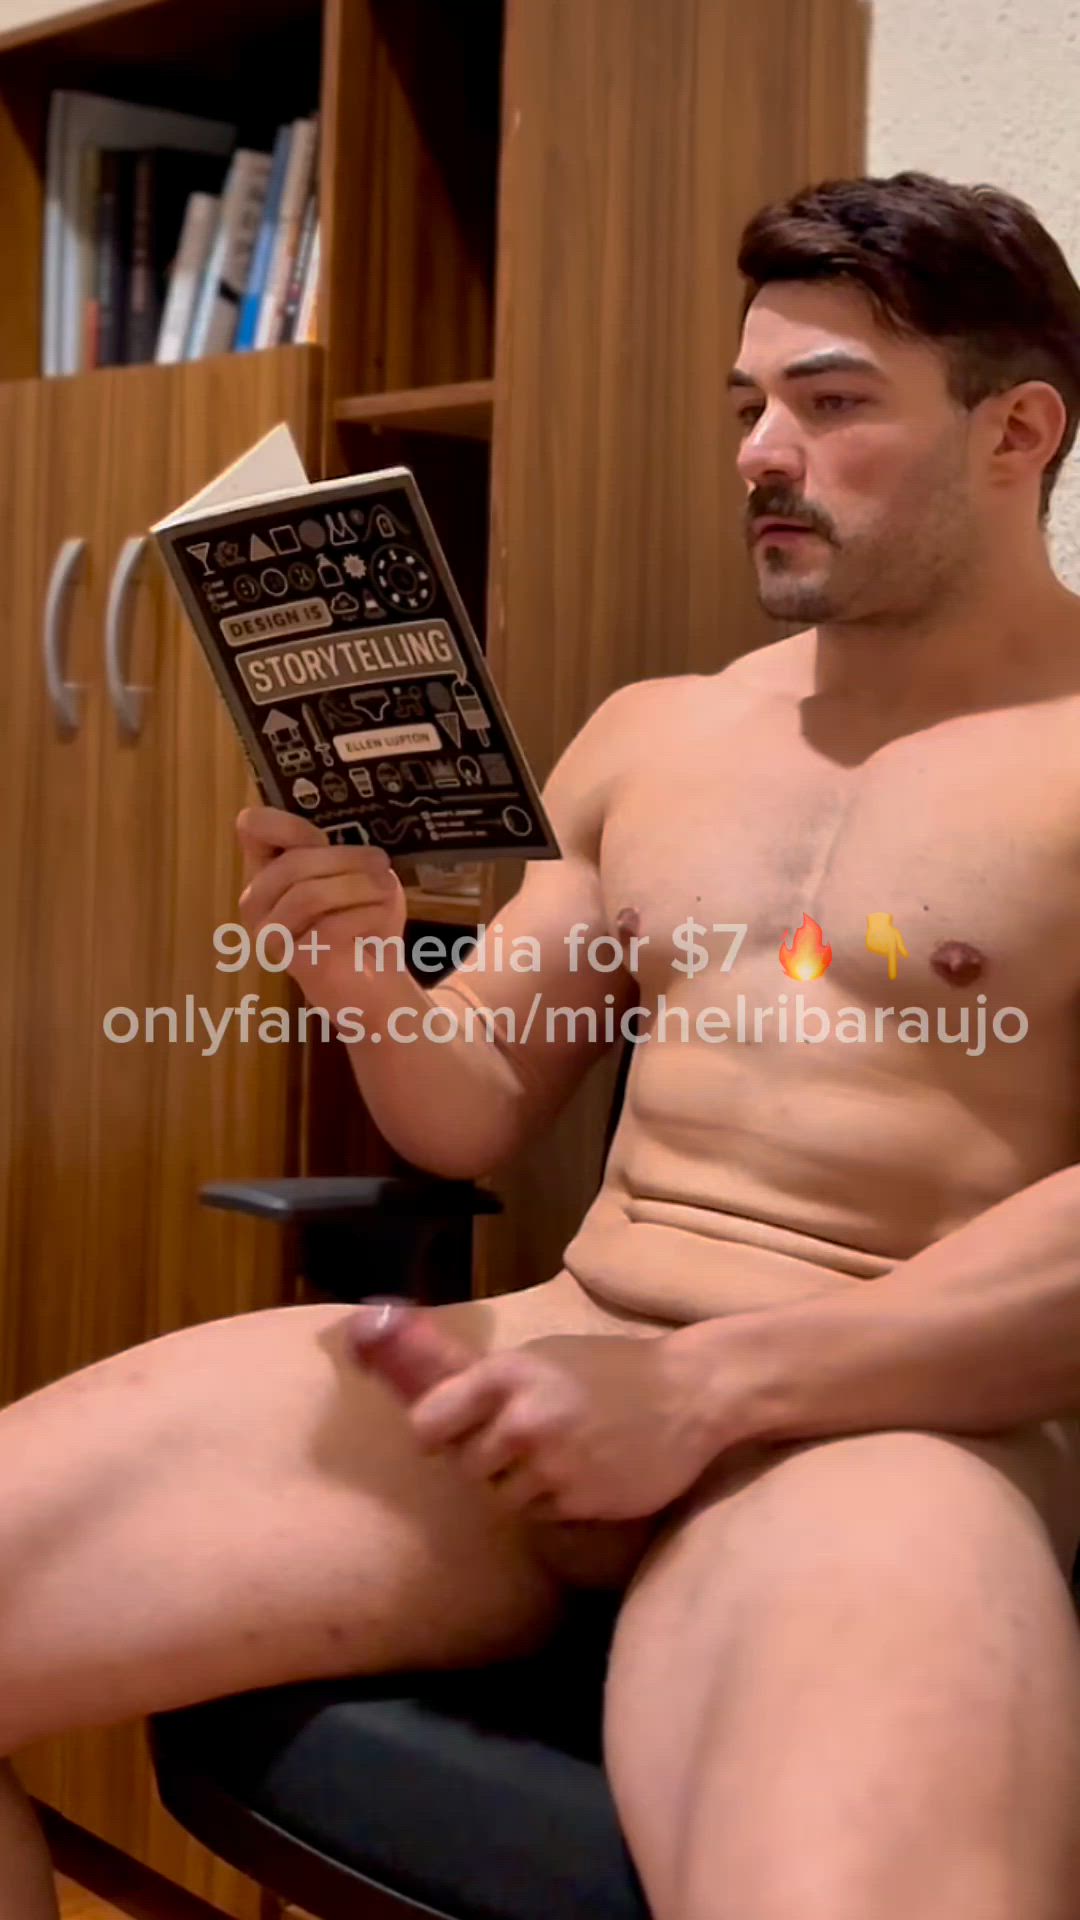 Amateur porn video with onlyfans model Michel Ribeiro Araujo <strong>@michelribaraujo</strong>